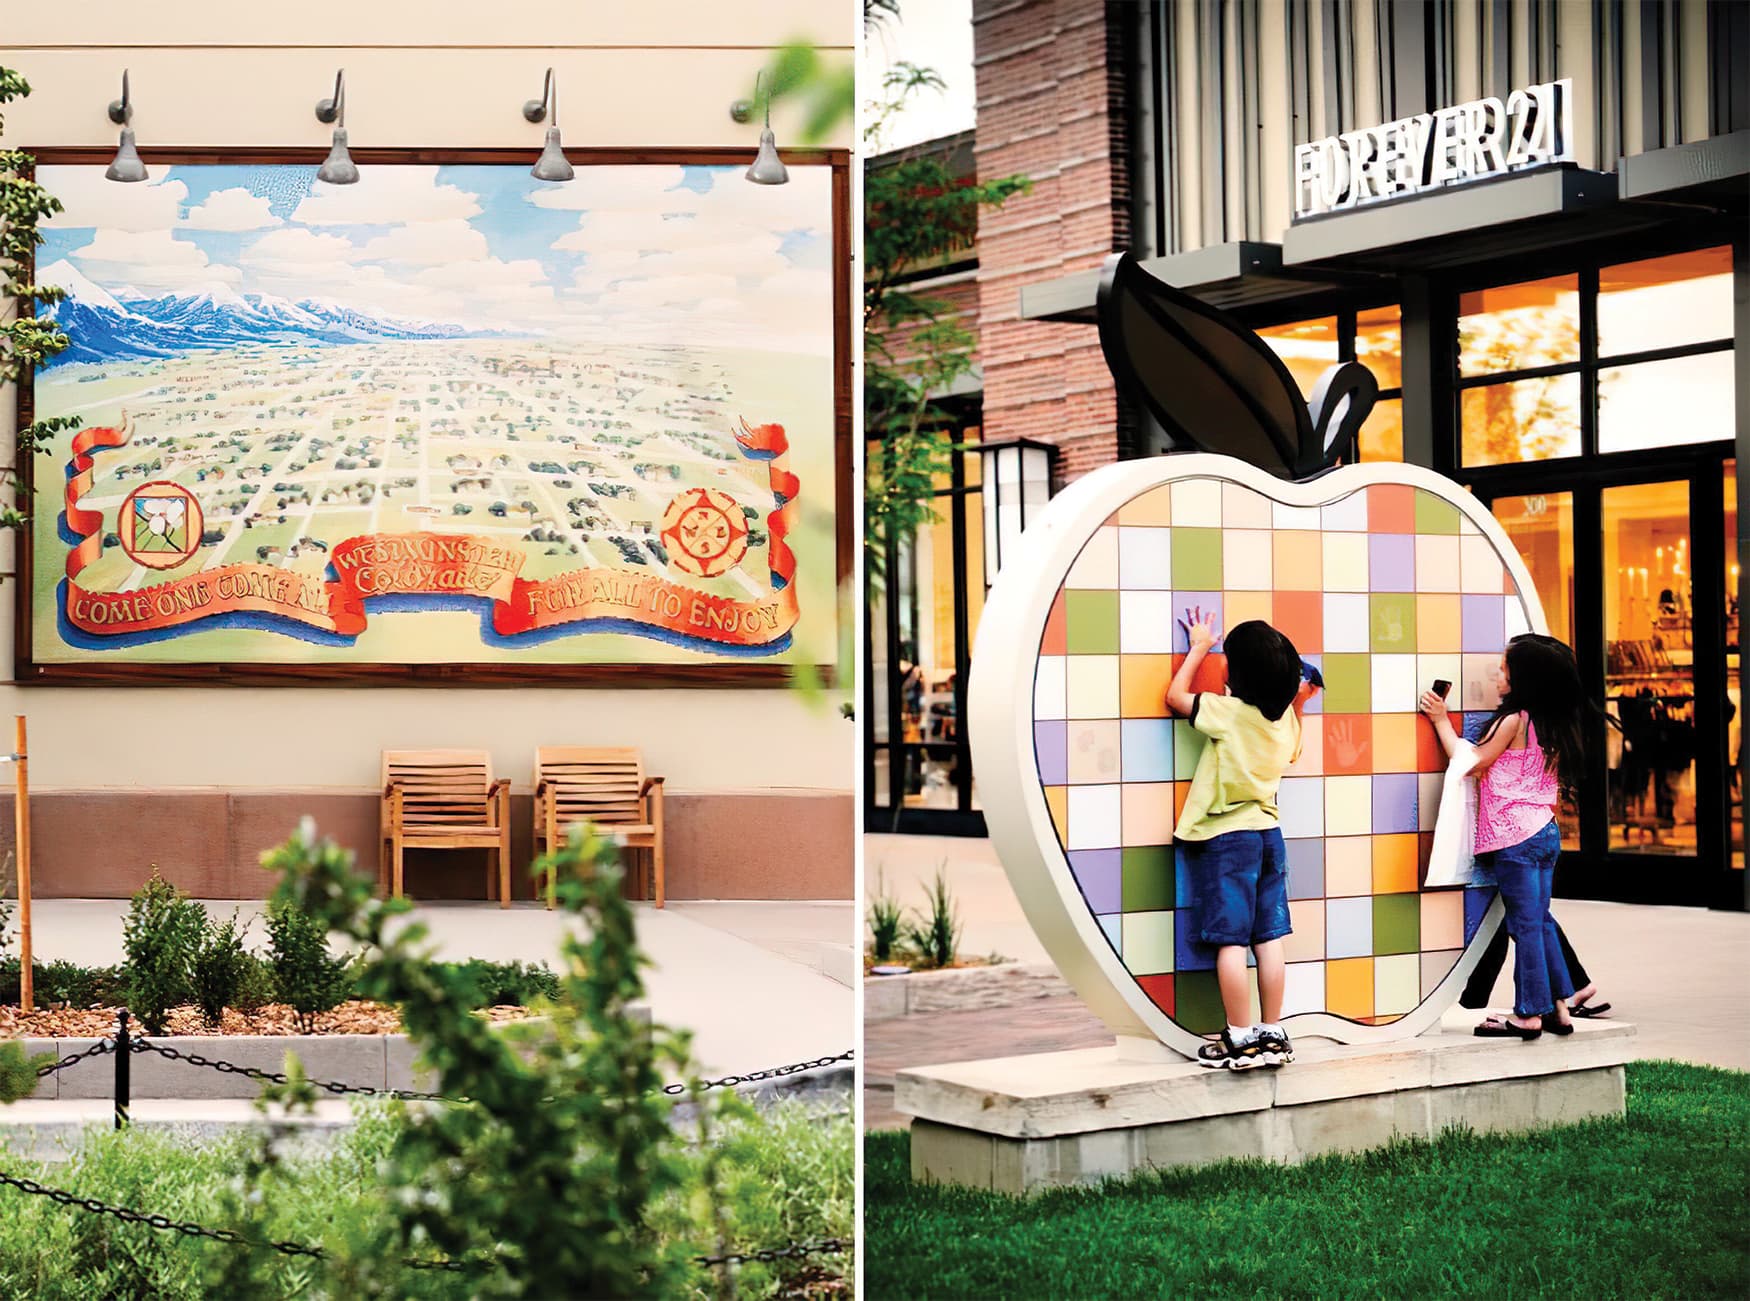 RSM Design worked to create a wayfinding system and Environmental Graphic Design program for The Orchard, a mixed-use retail project in Westminster, Colorado.